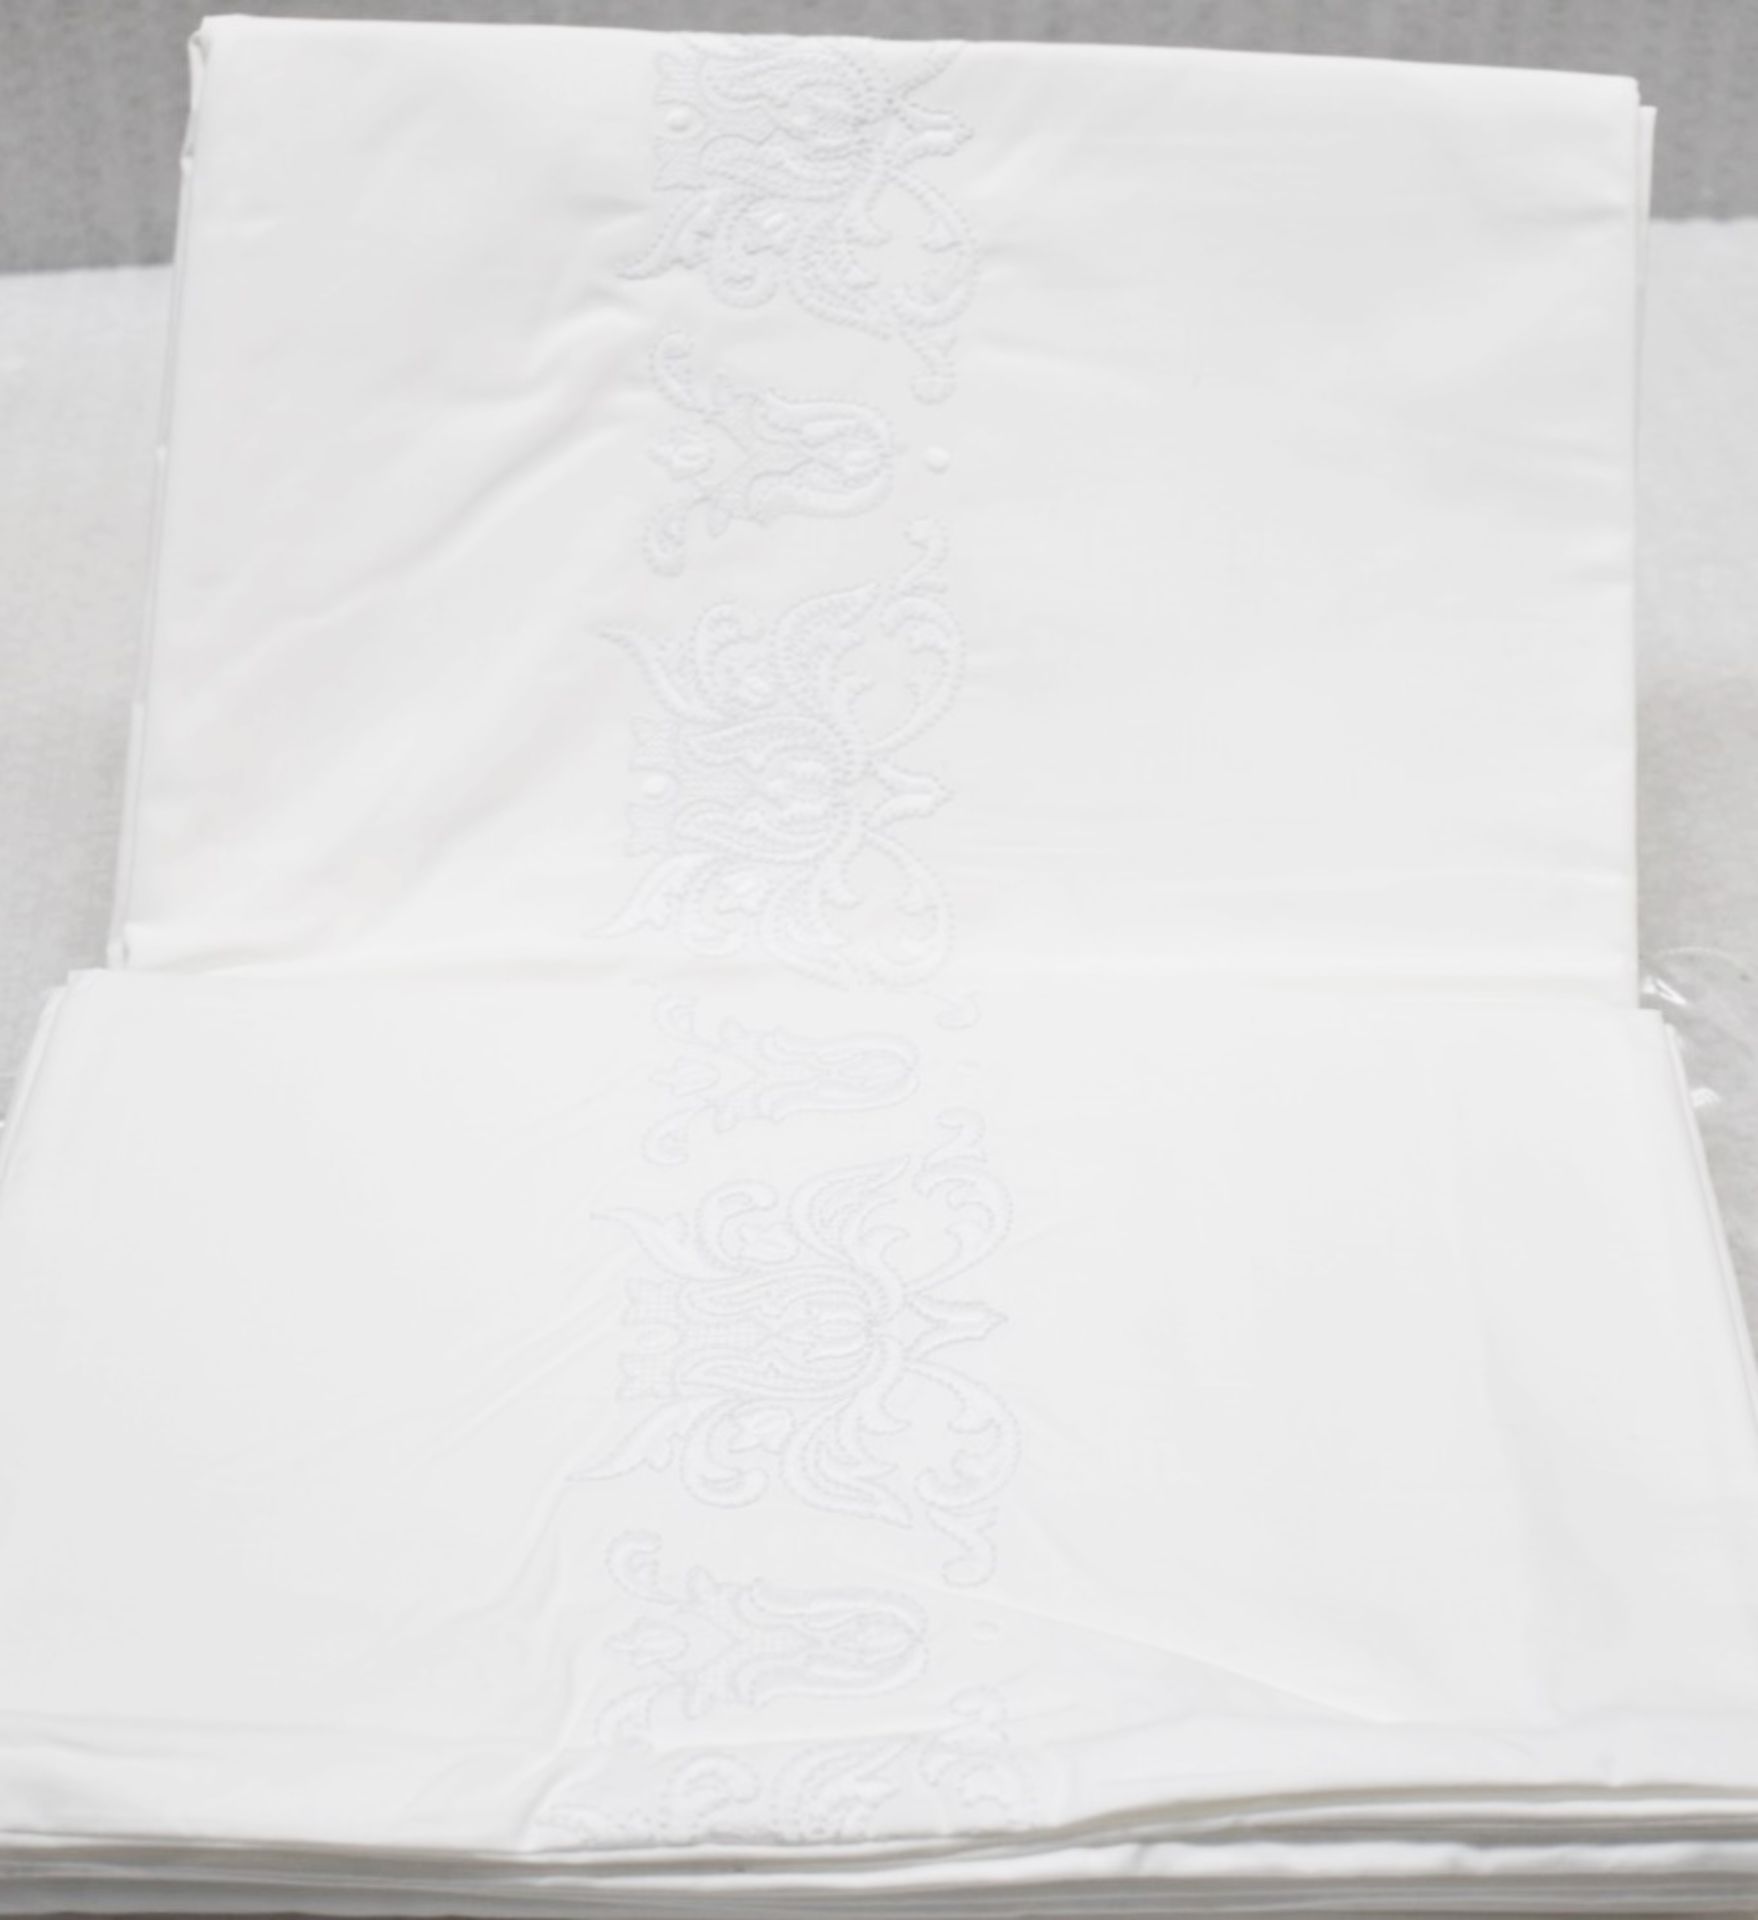 1 x YVES DELORME 'Muse' Luxury King Duvet Cover (240cm x 220cm) - Original Price £449.00 - Image 6 of 7